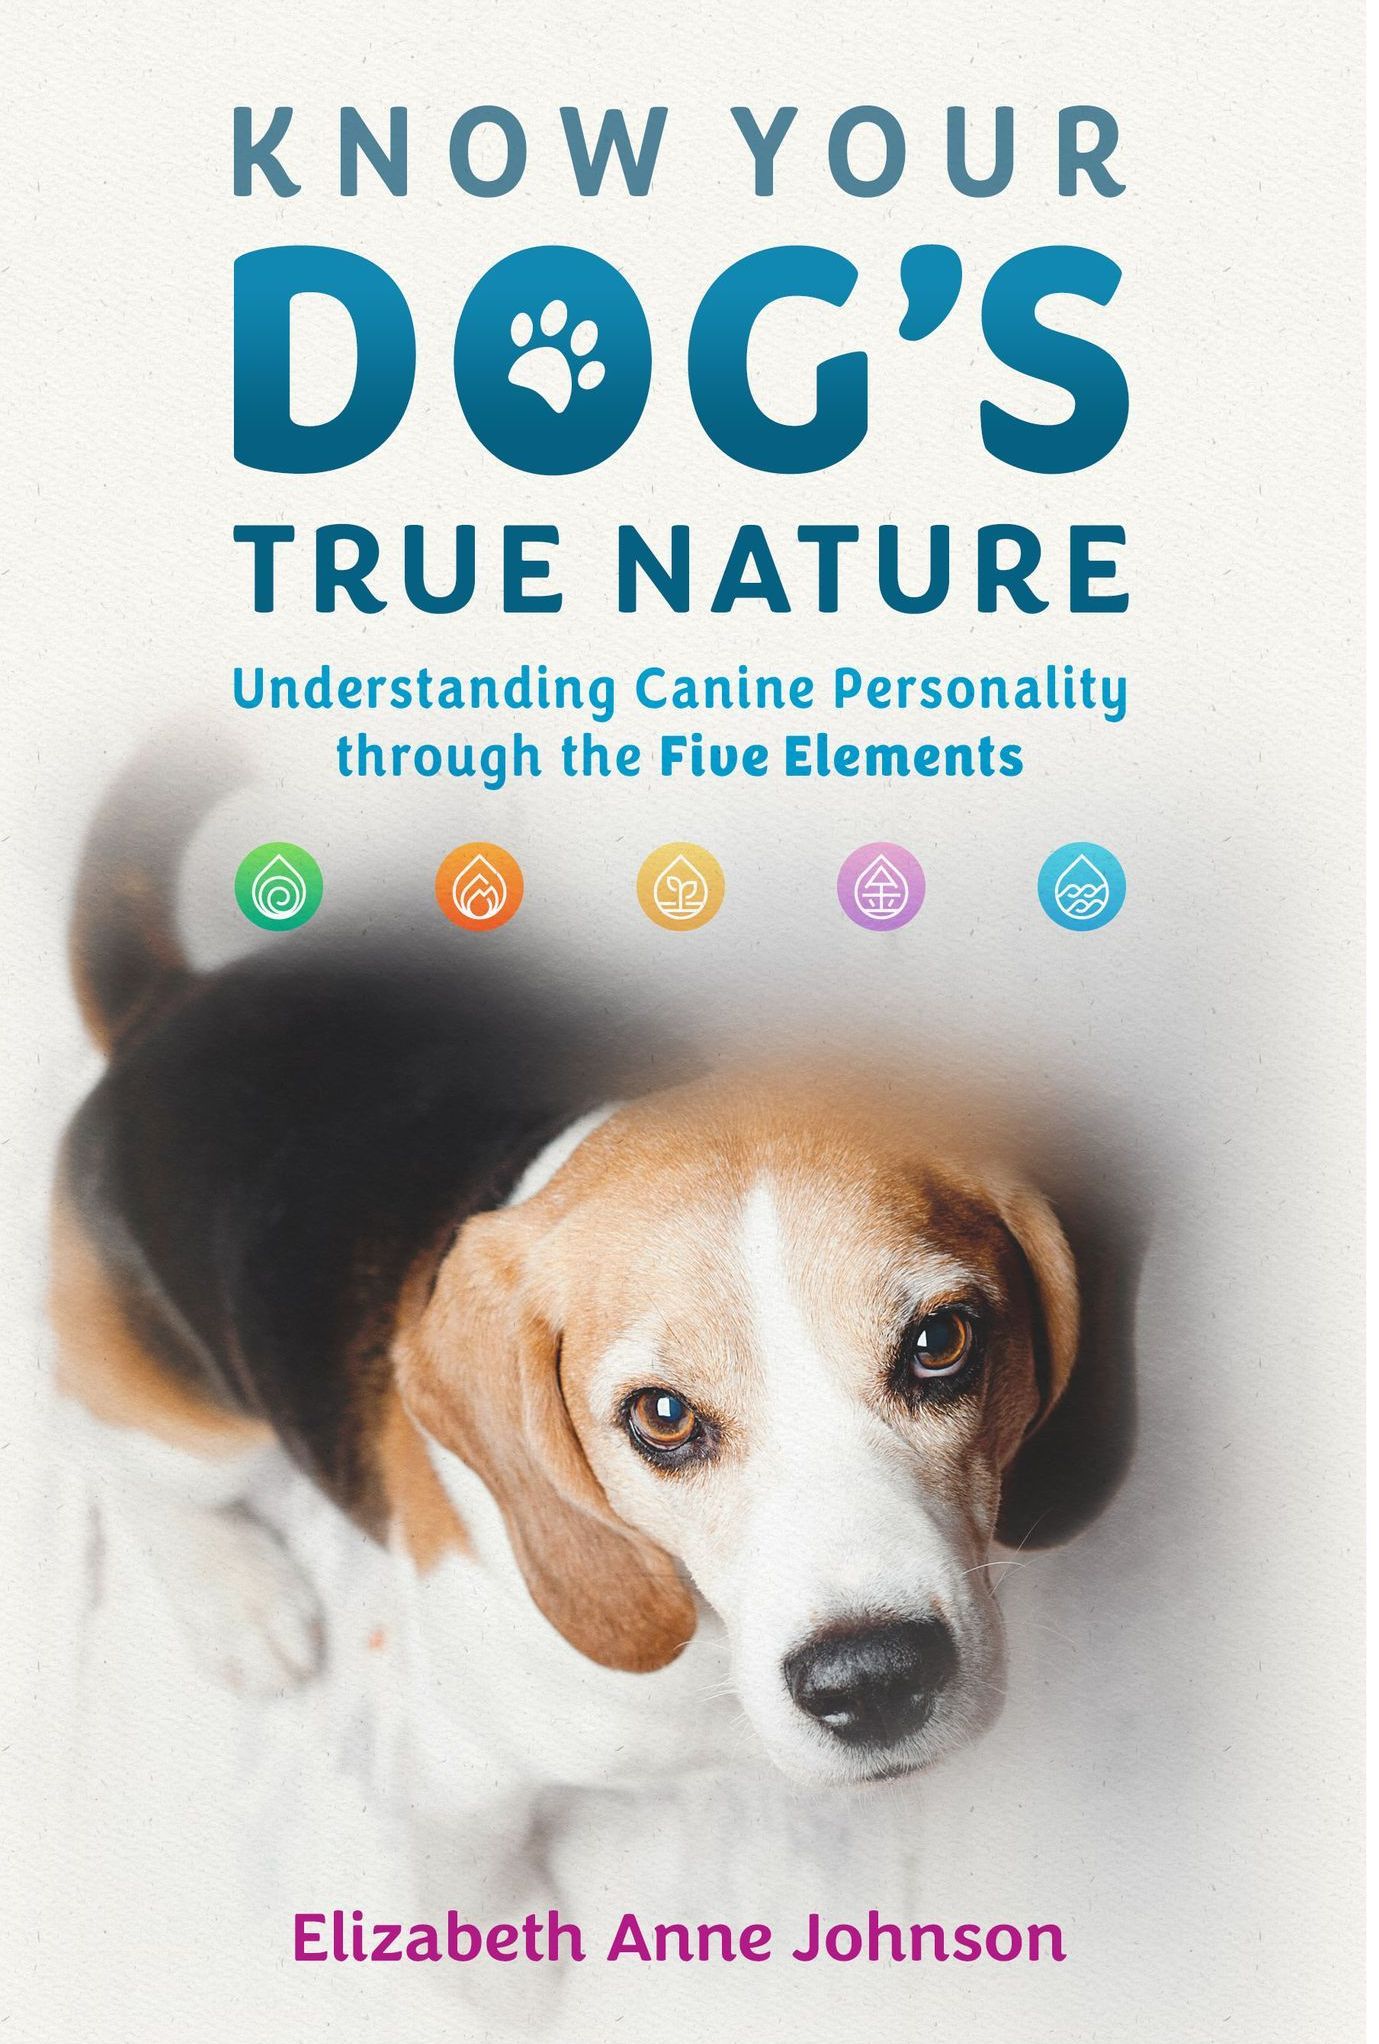 Know Your Dog's True Nature - Understanding Canine Personality through the Five Elements.